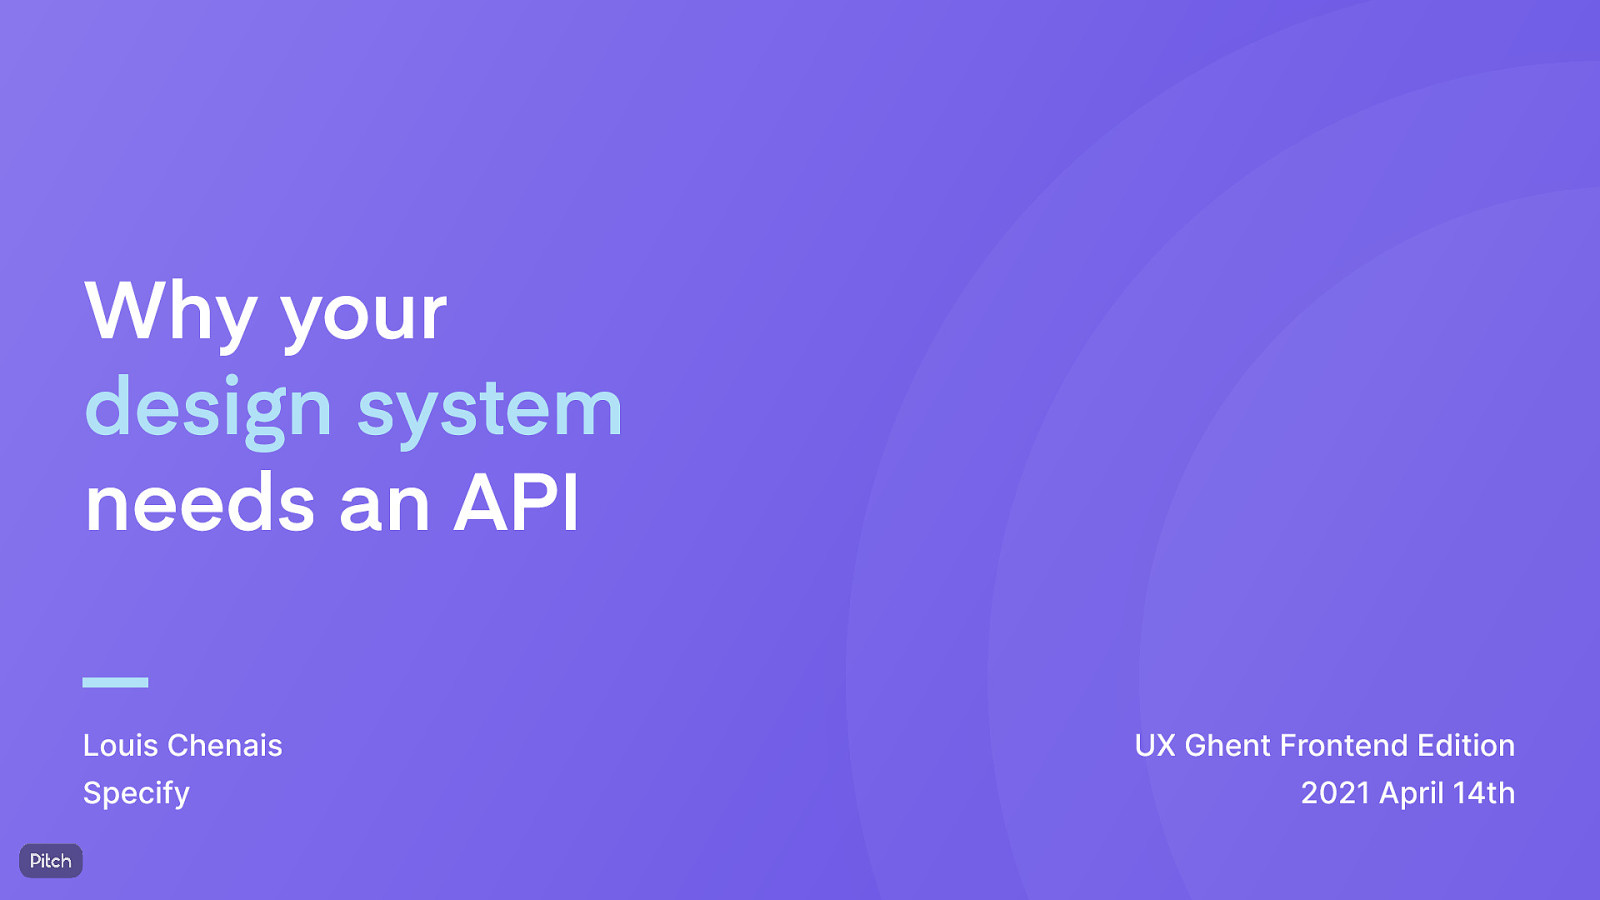 Why your design system needs an API